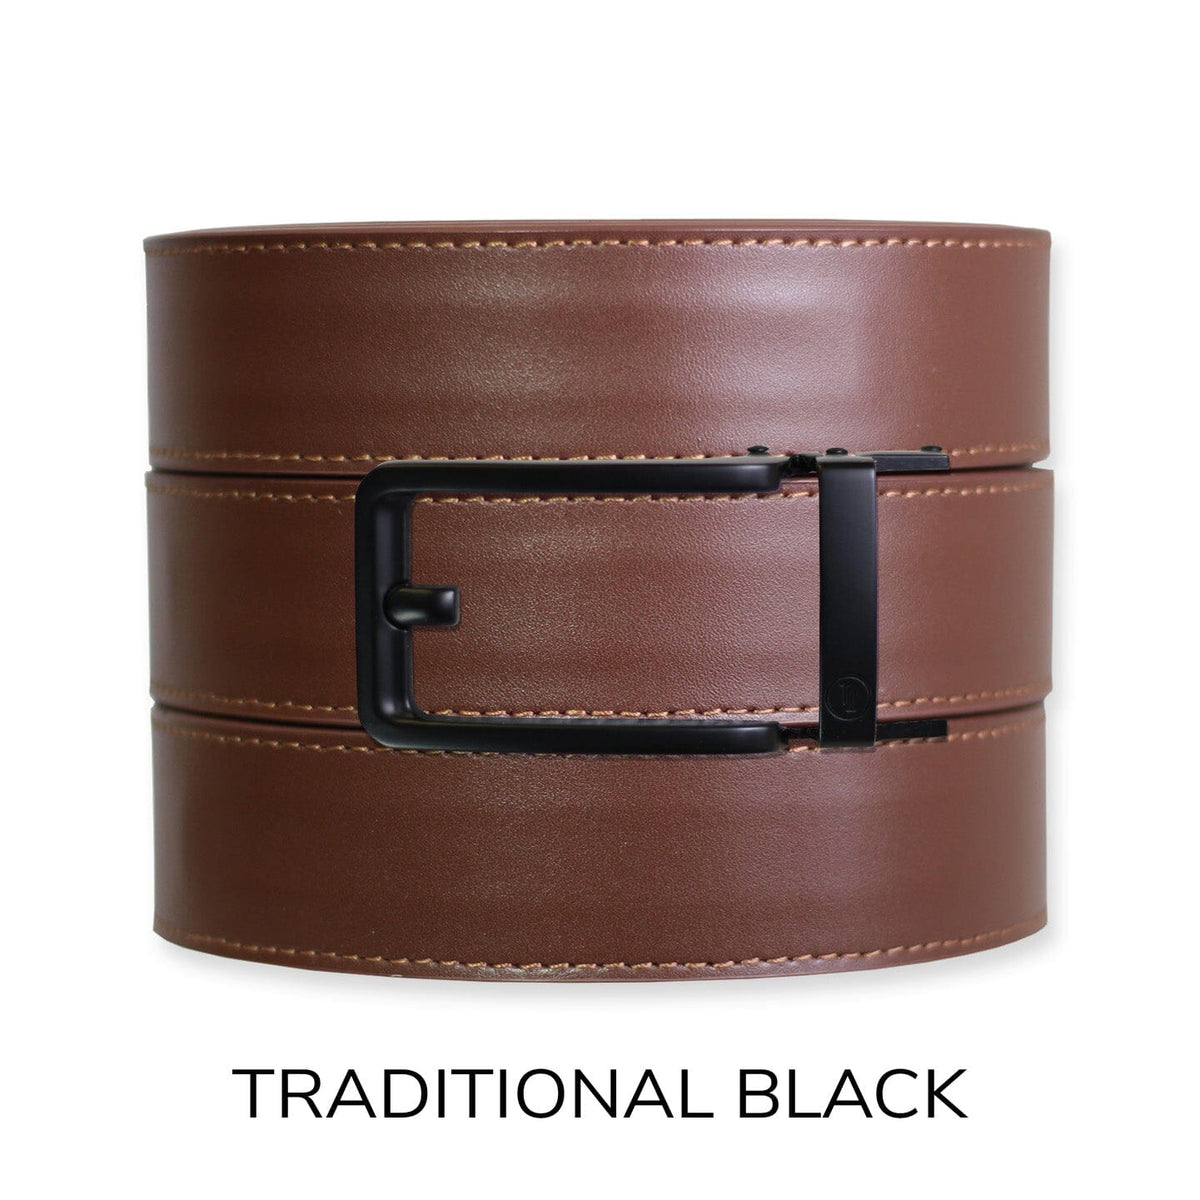 Smooth Leather Dress Belt With Pin Buckle - Chestnut/Black, Belts